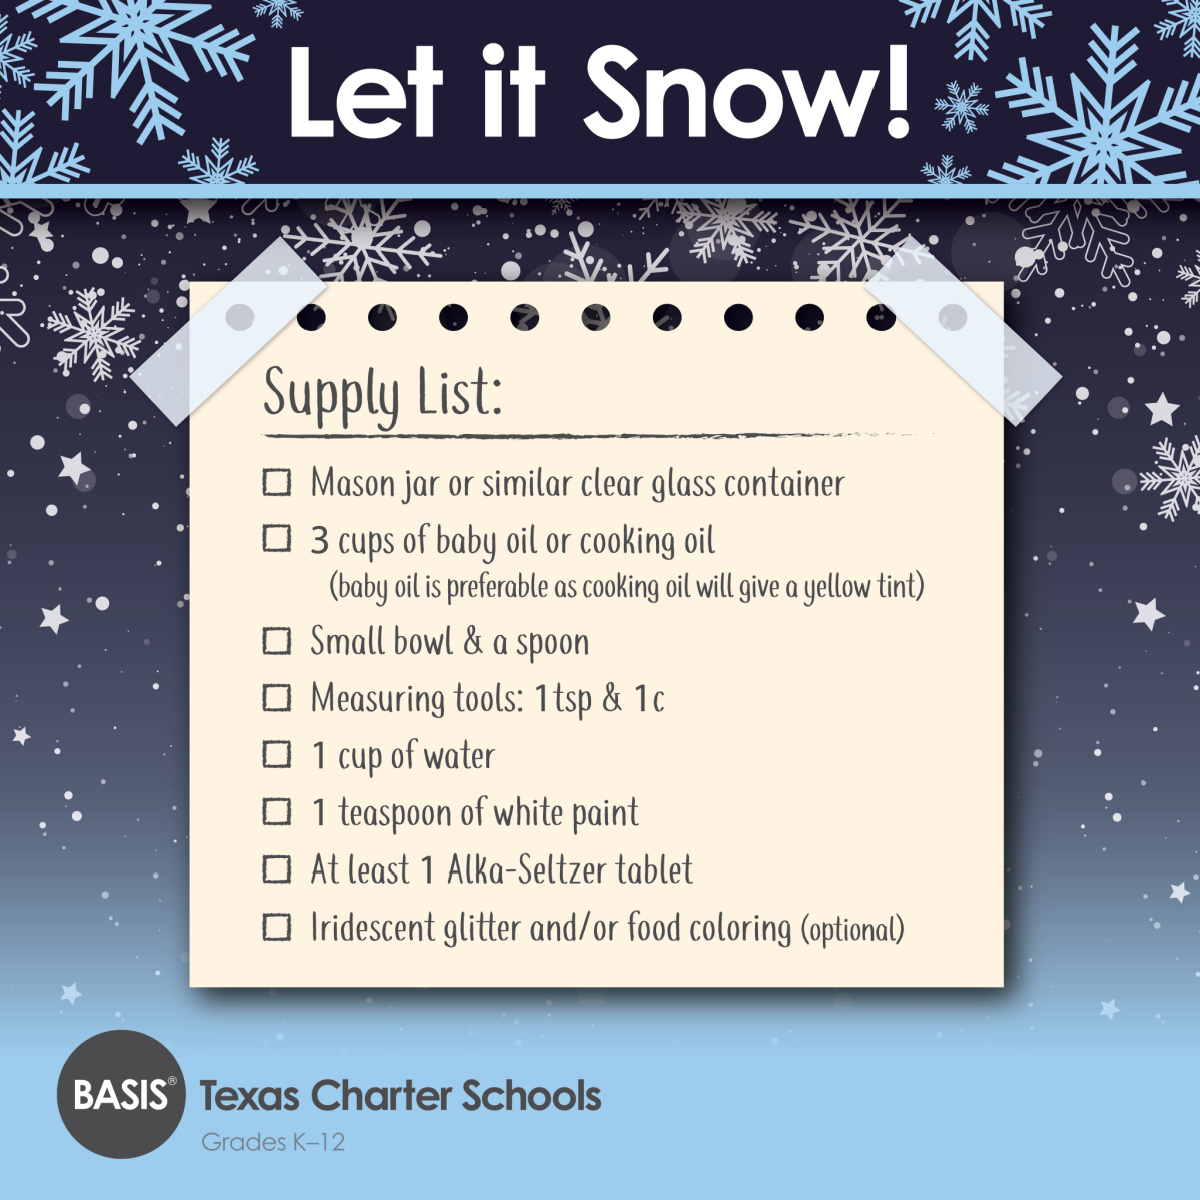 Supply List for Snowstorm in a Bottle Kitchen Chemistry Audrey Hagopian BASIS Charter Schools